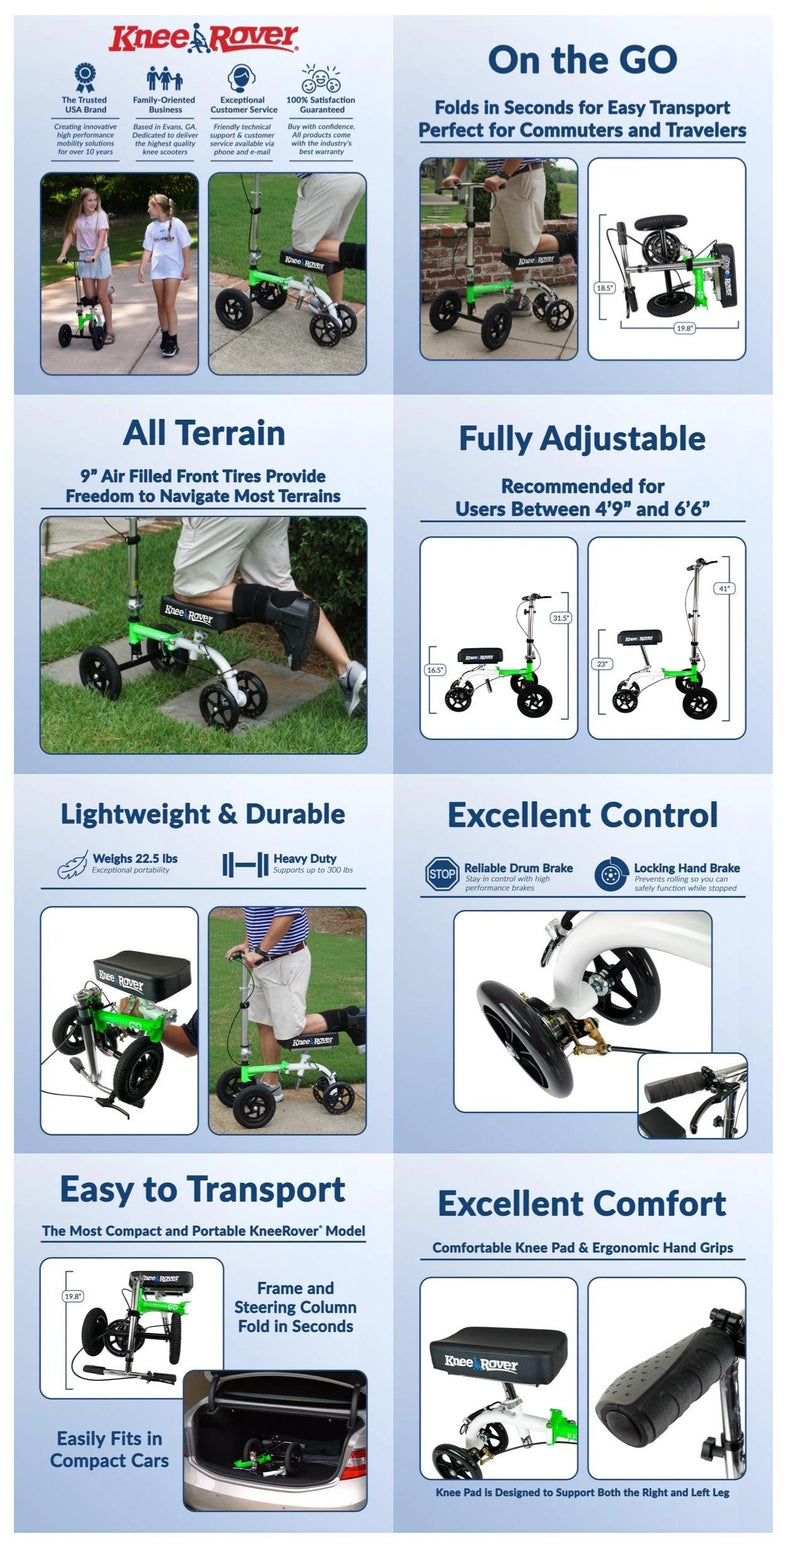 Load image into Gallery viewer, NEW KneeRover® GO HYBRID Knee Scooter  with ALL TERRAIN Front Wheels - KneeRover
